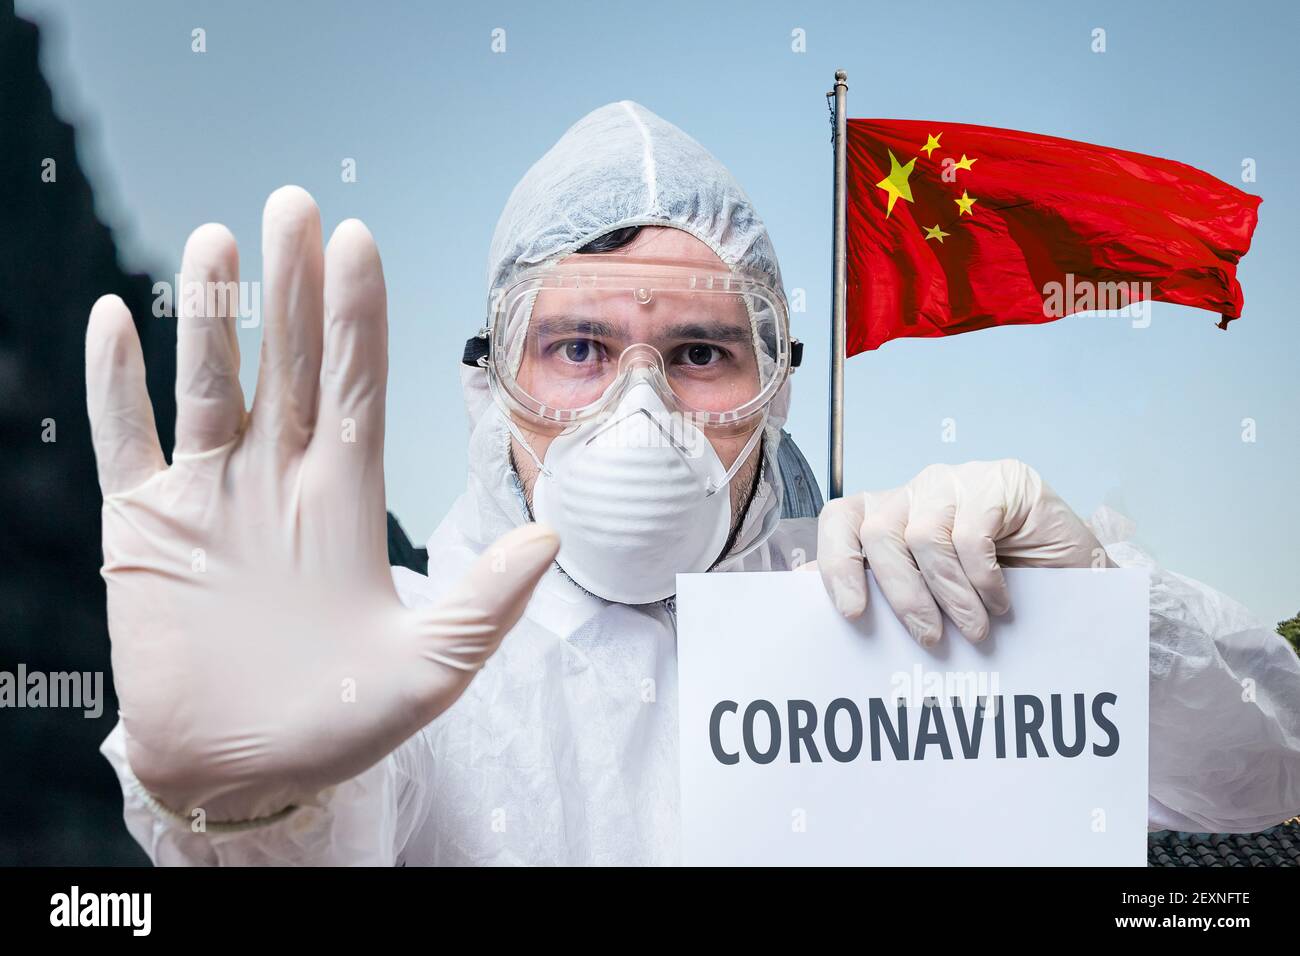 Doctor in coveralls warns of coronavirus infection in China. Chinese flag in background. Stock Photo